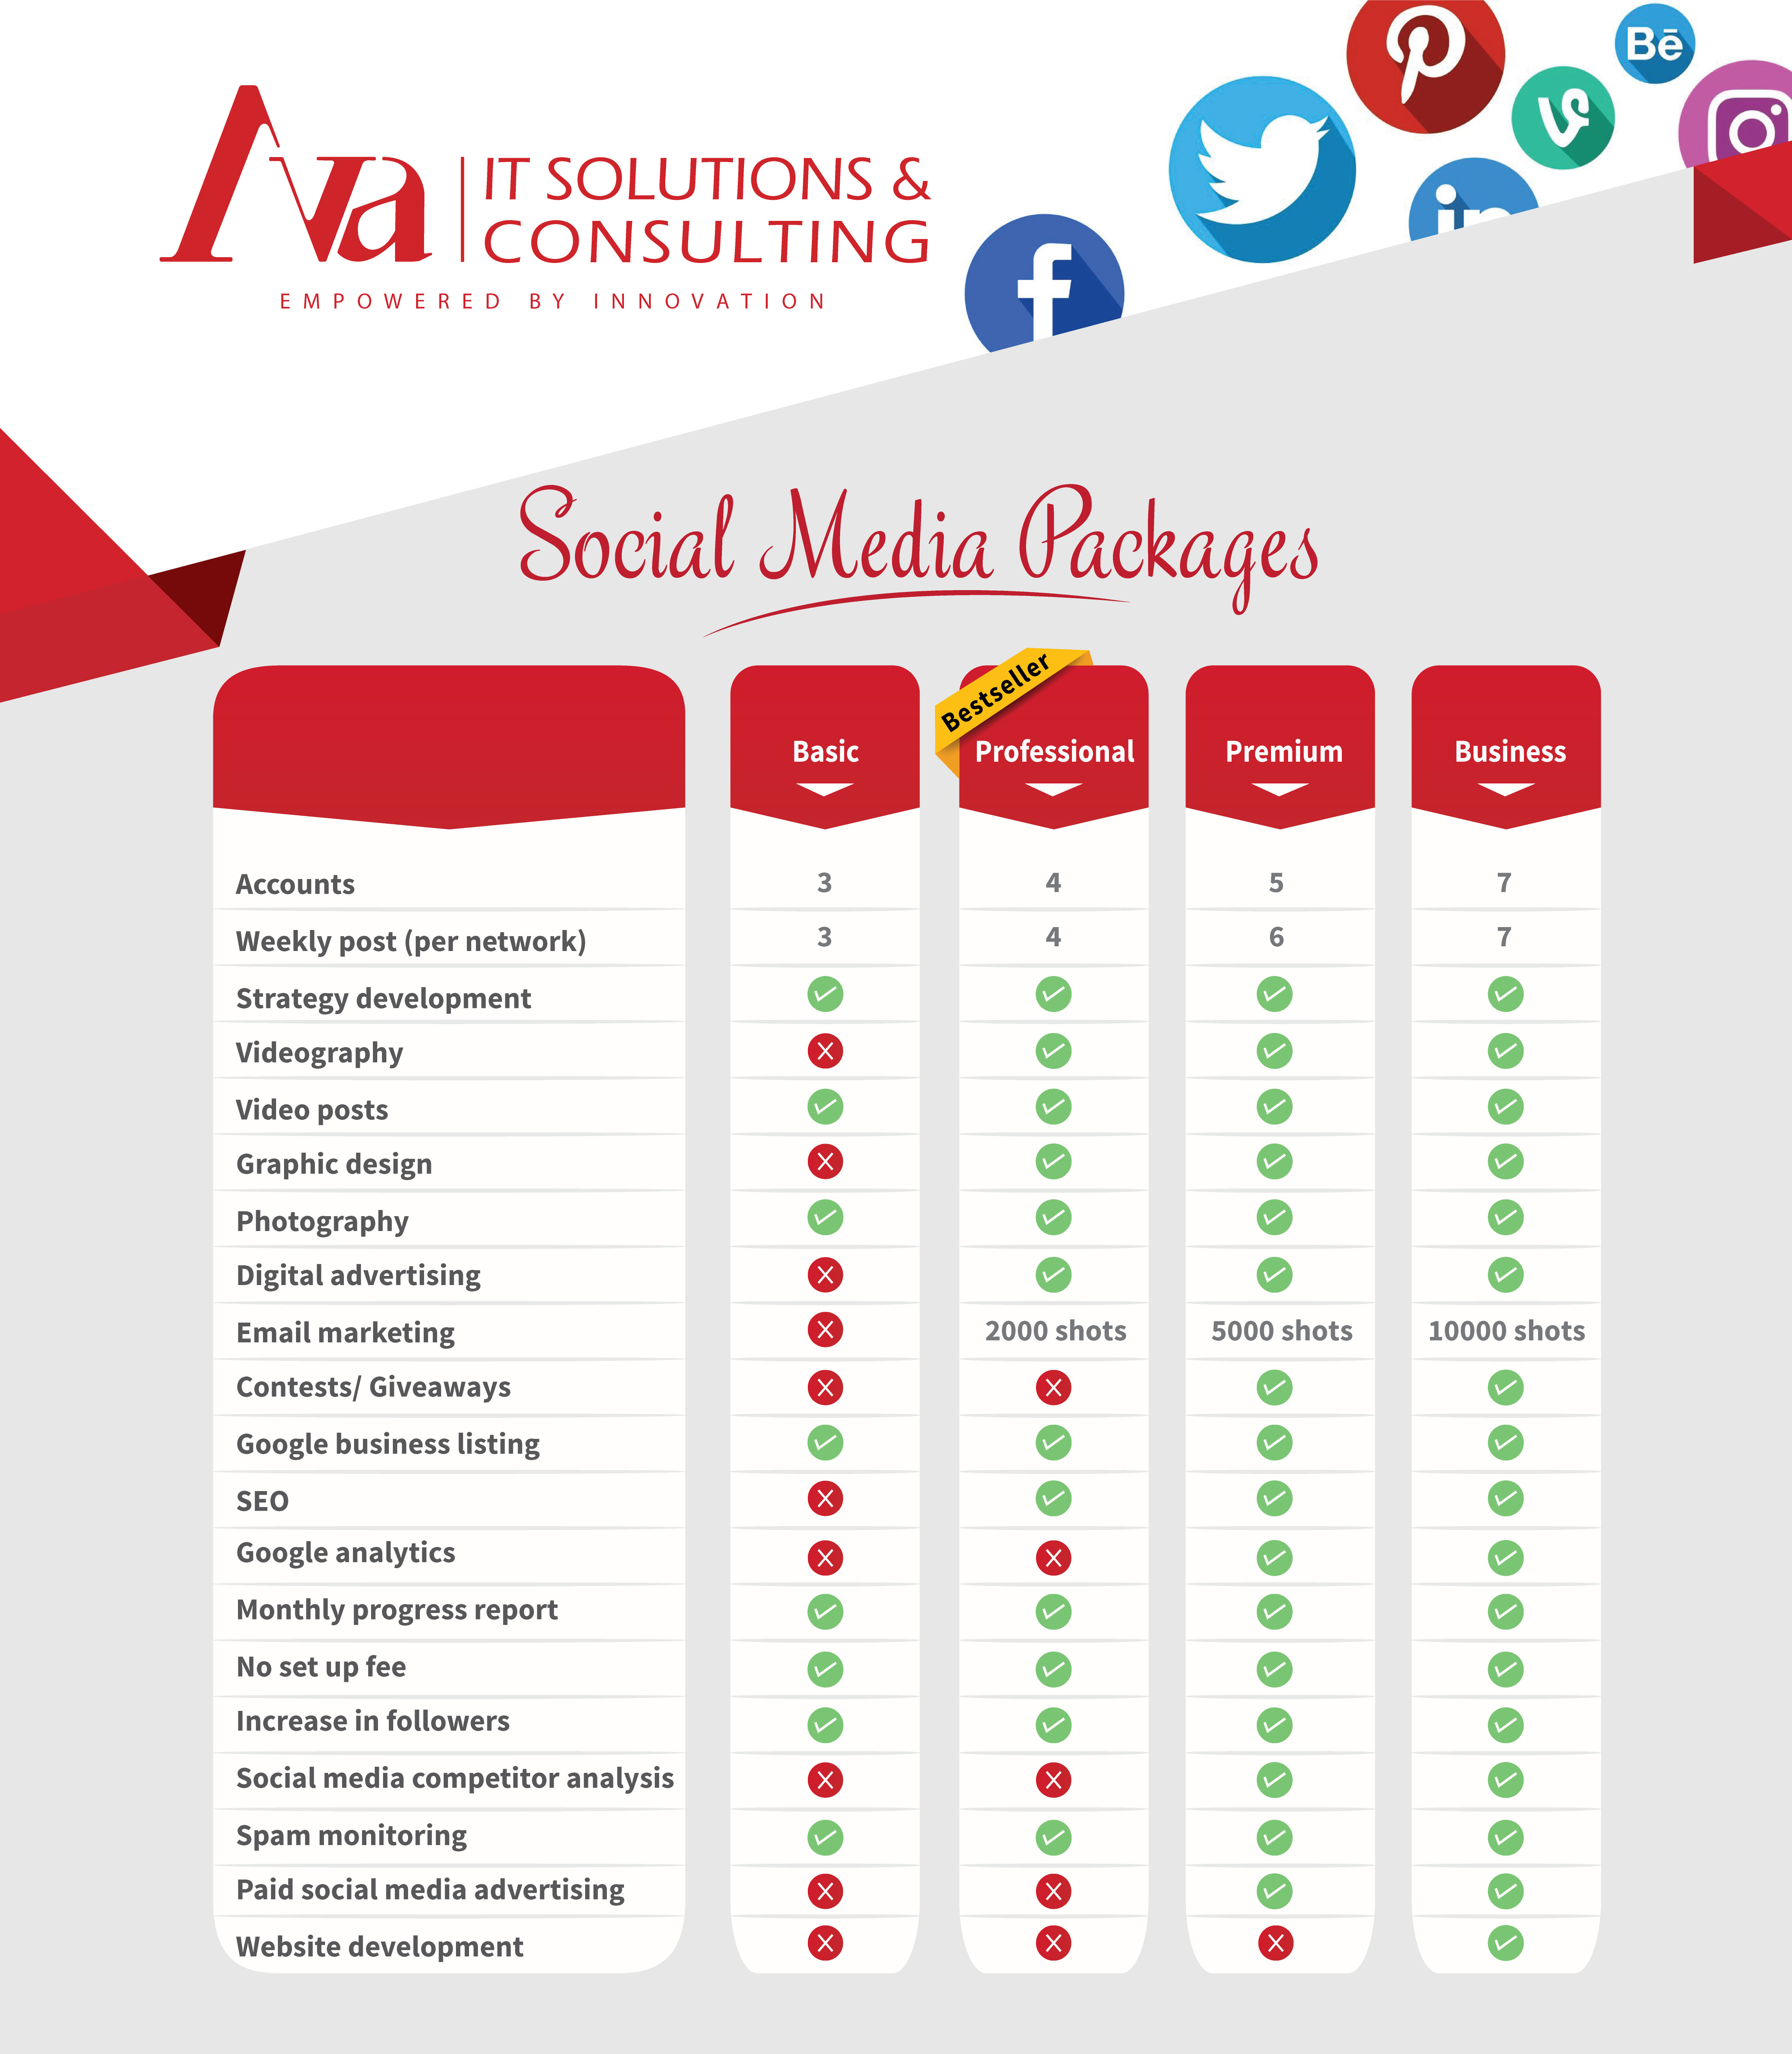 Social media packages AVAIT